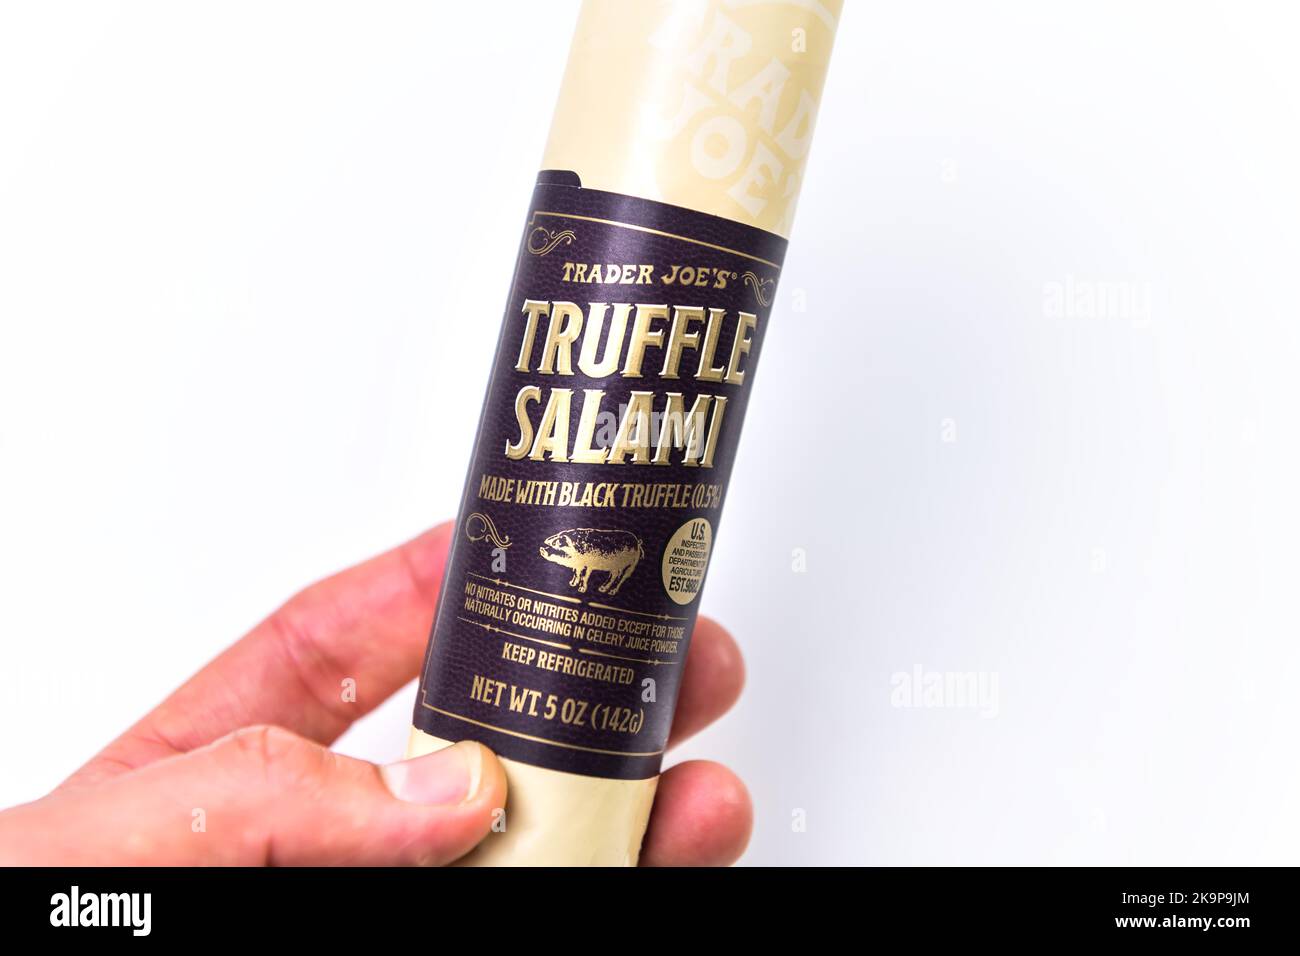 Naples, USA - October 21, 2021: Closeup macro of hand holding black truffle salami sausage by Trader Joe's brand private label with no nitrates food Stock Photo